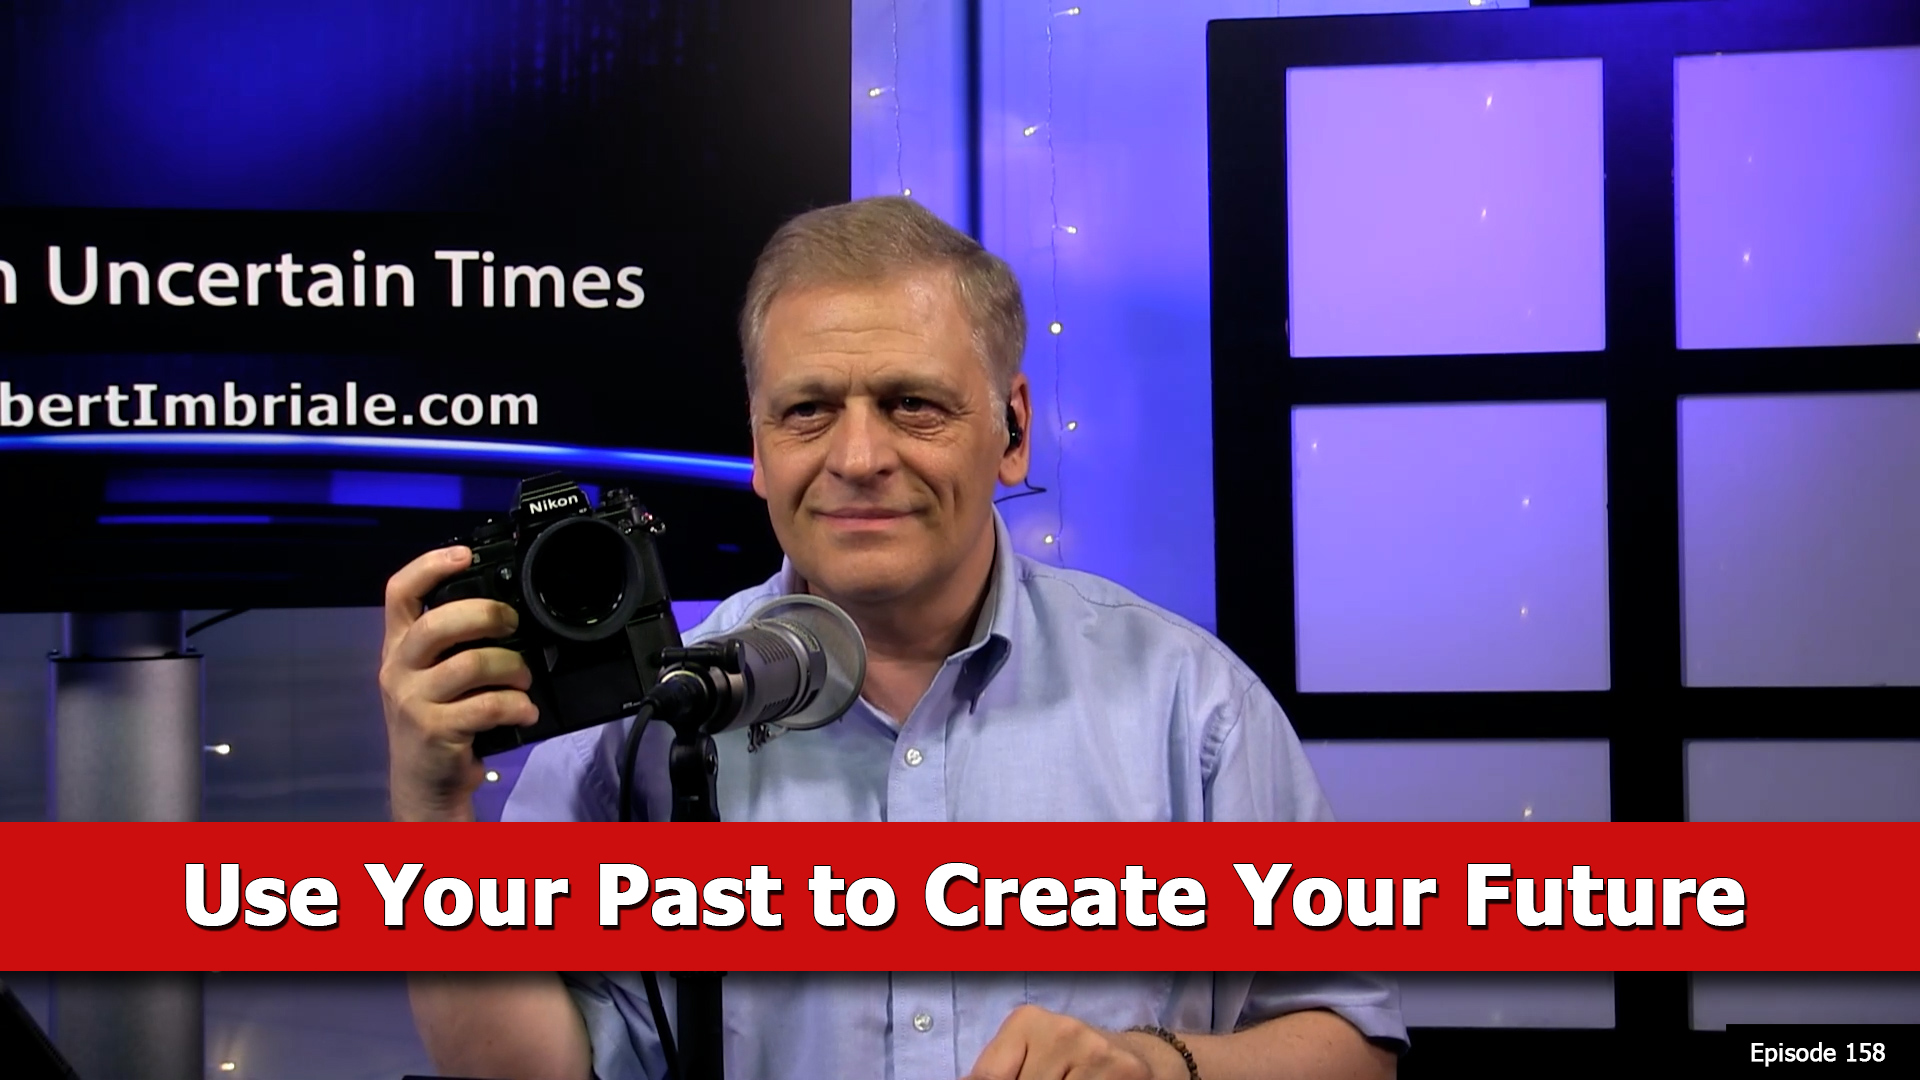 How to Build Your Future on Your Past